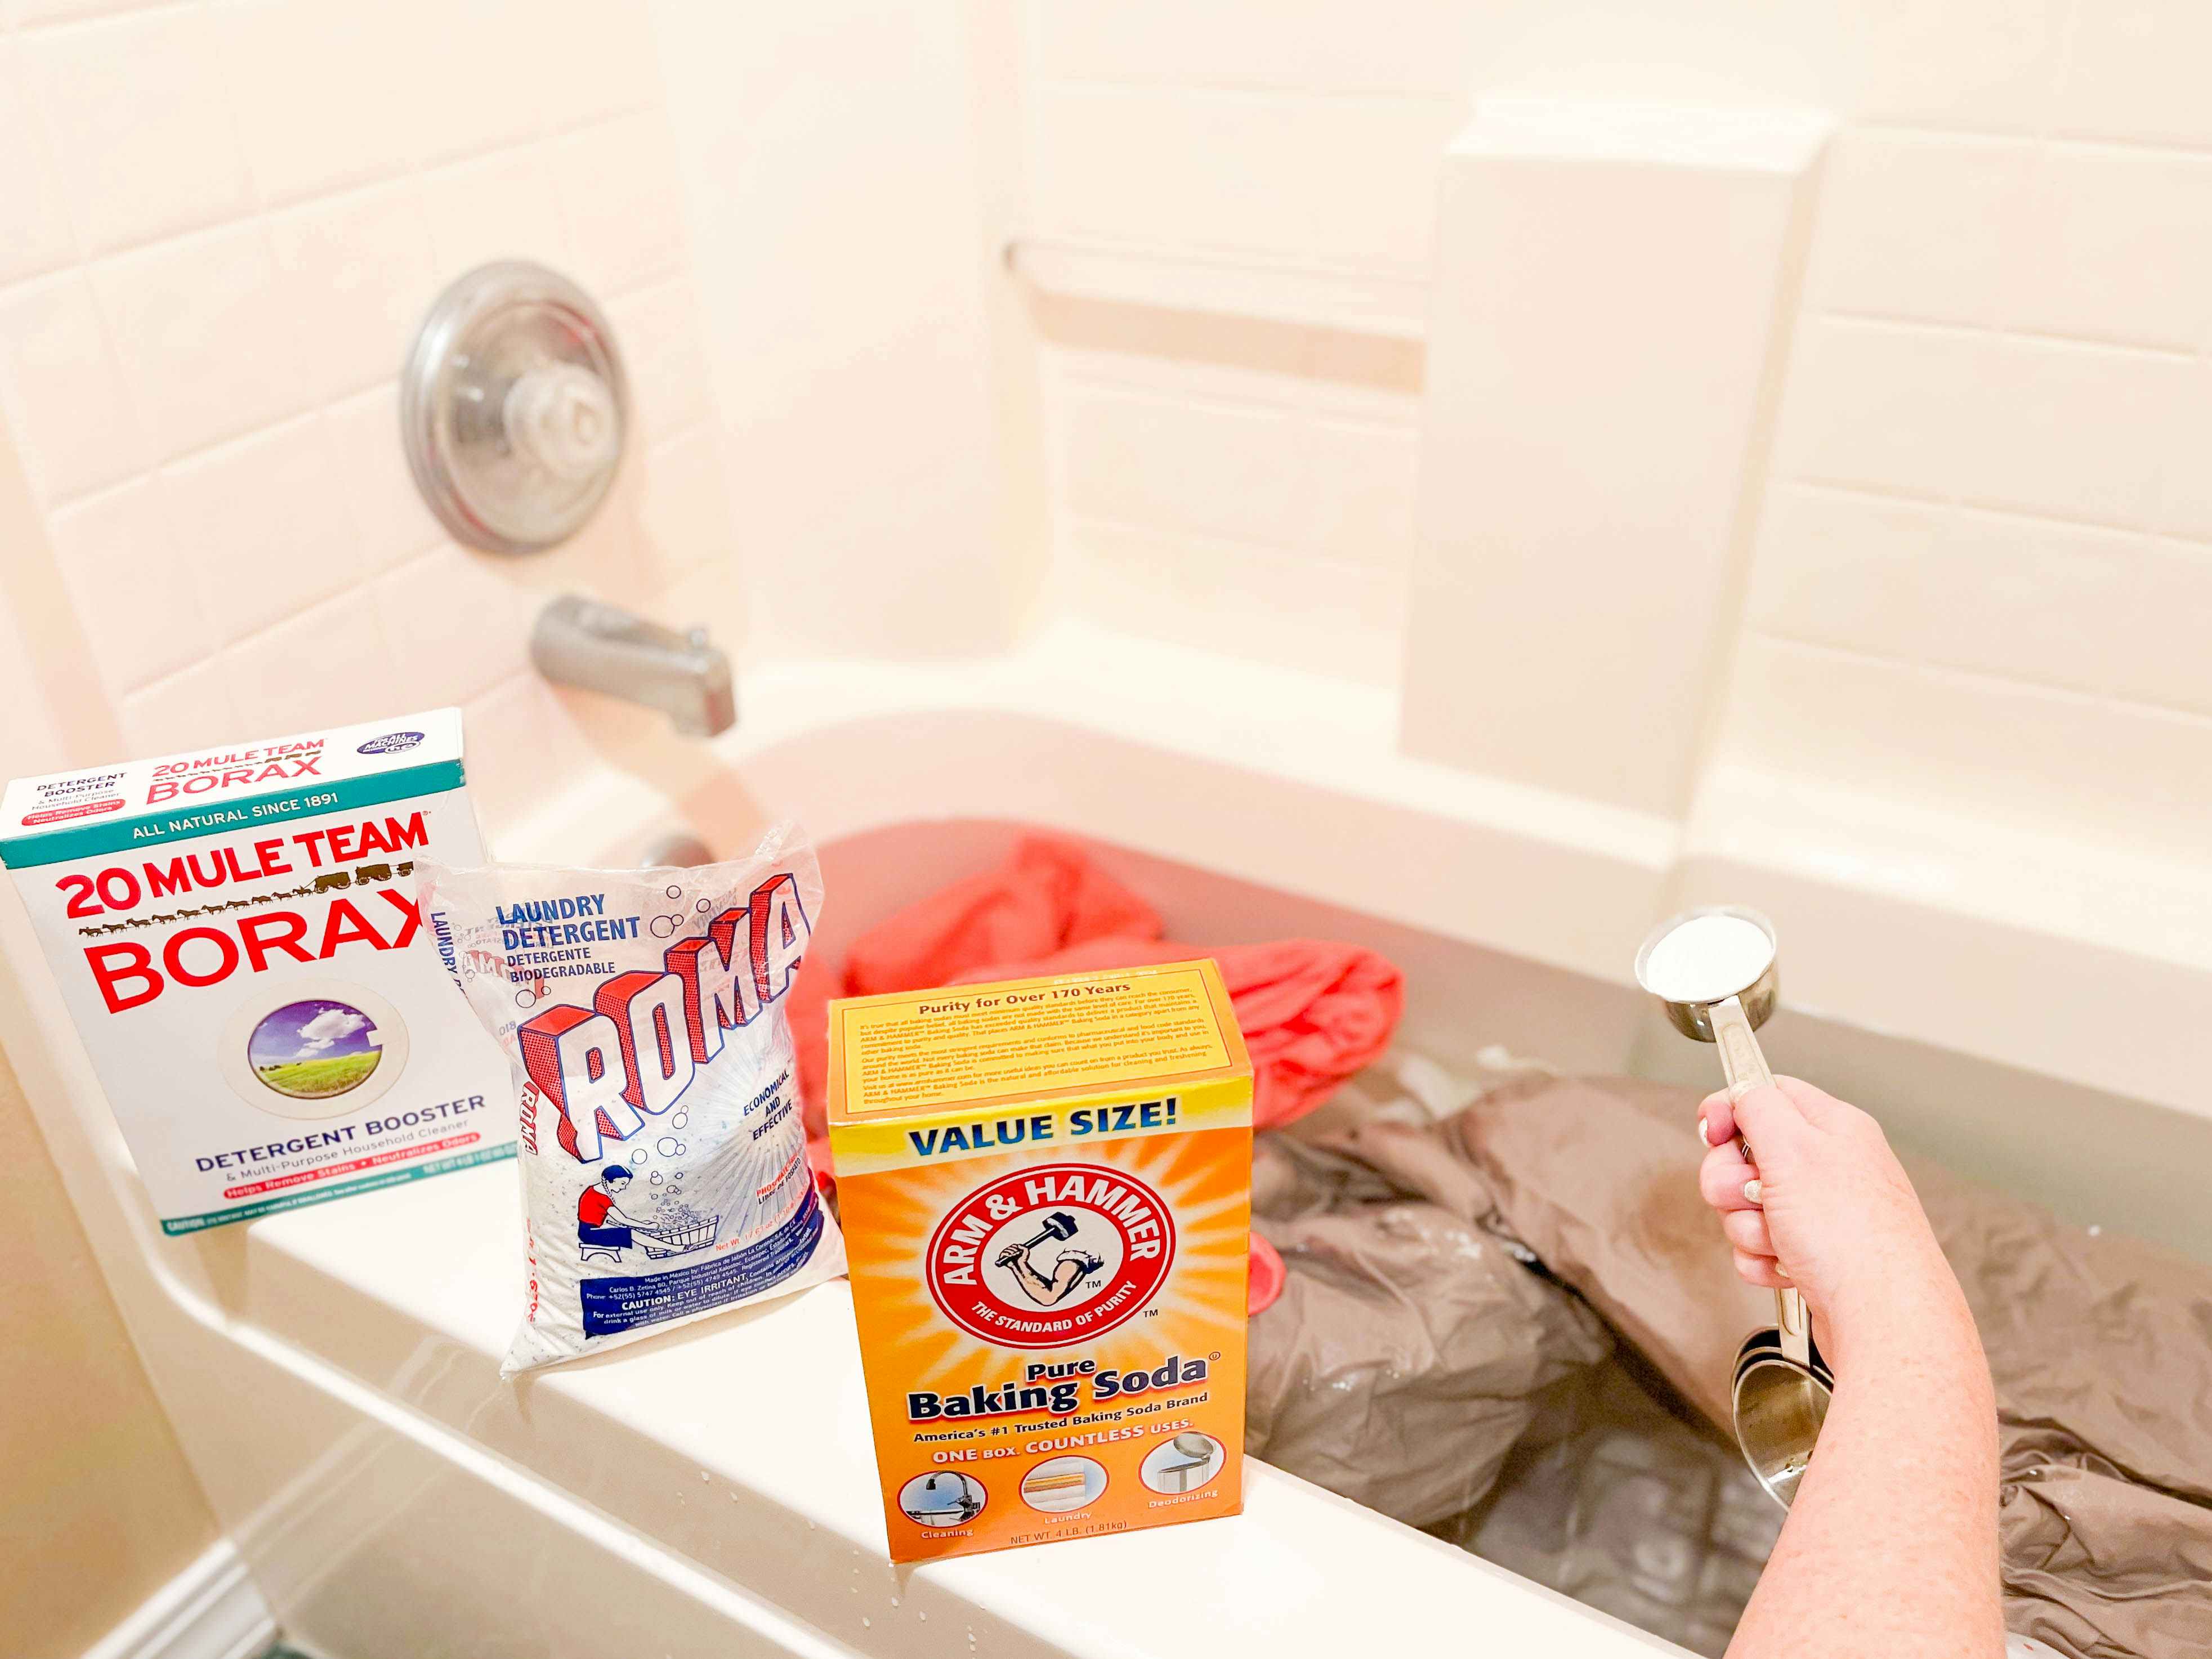 bath tub filled with water and laundry with cleaning products to strip laundry